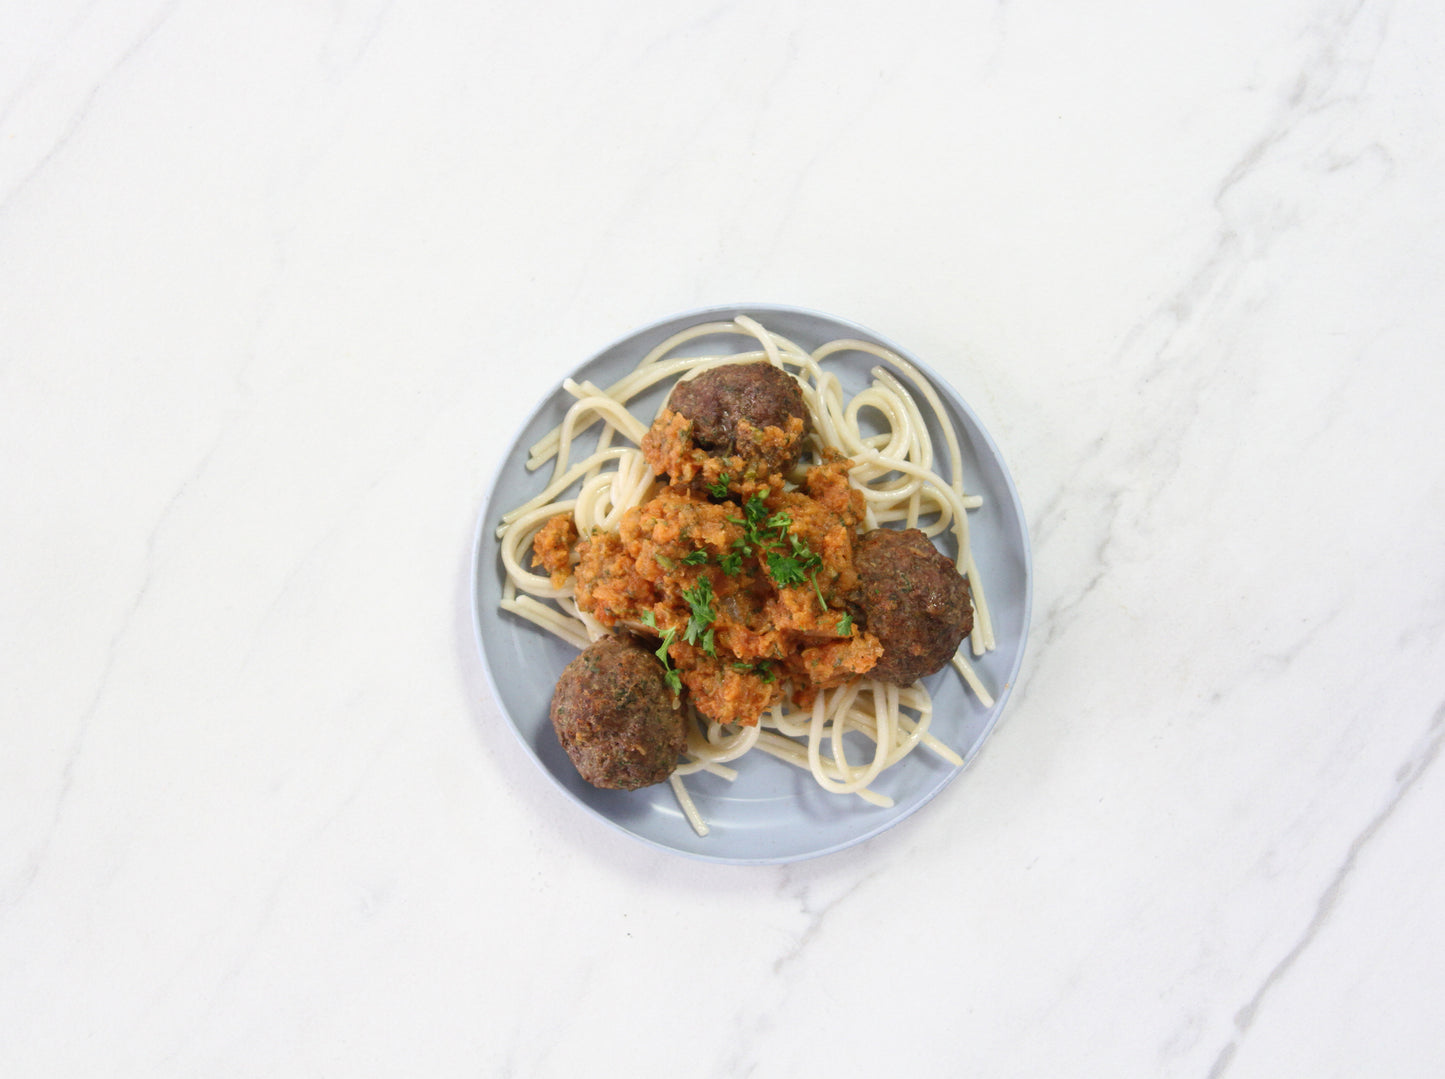 KIDS LUNCH: Spaghetti and Meatballs with Broccoli